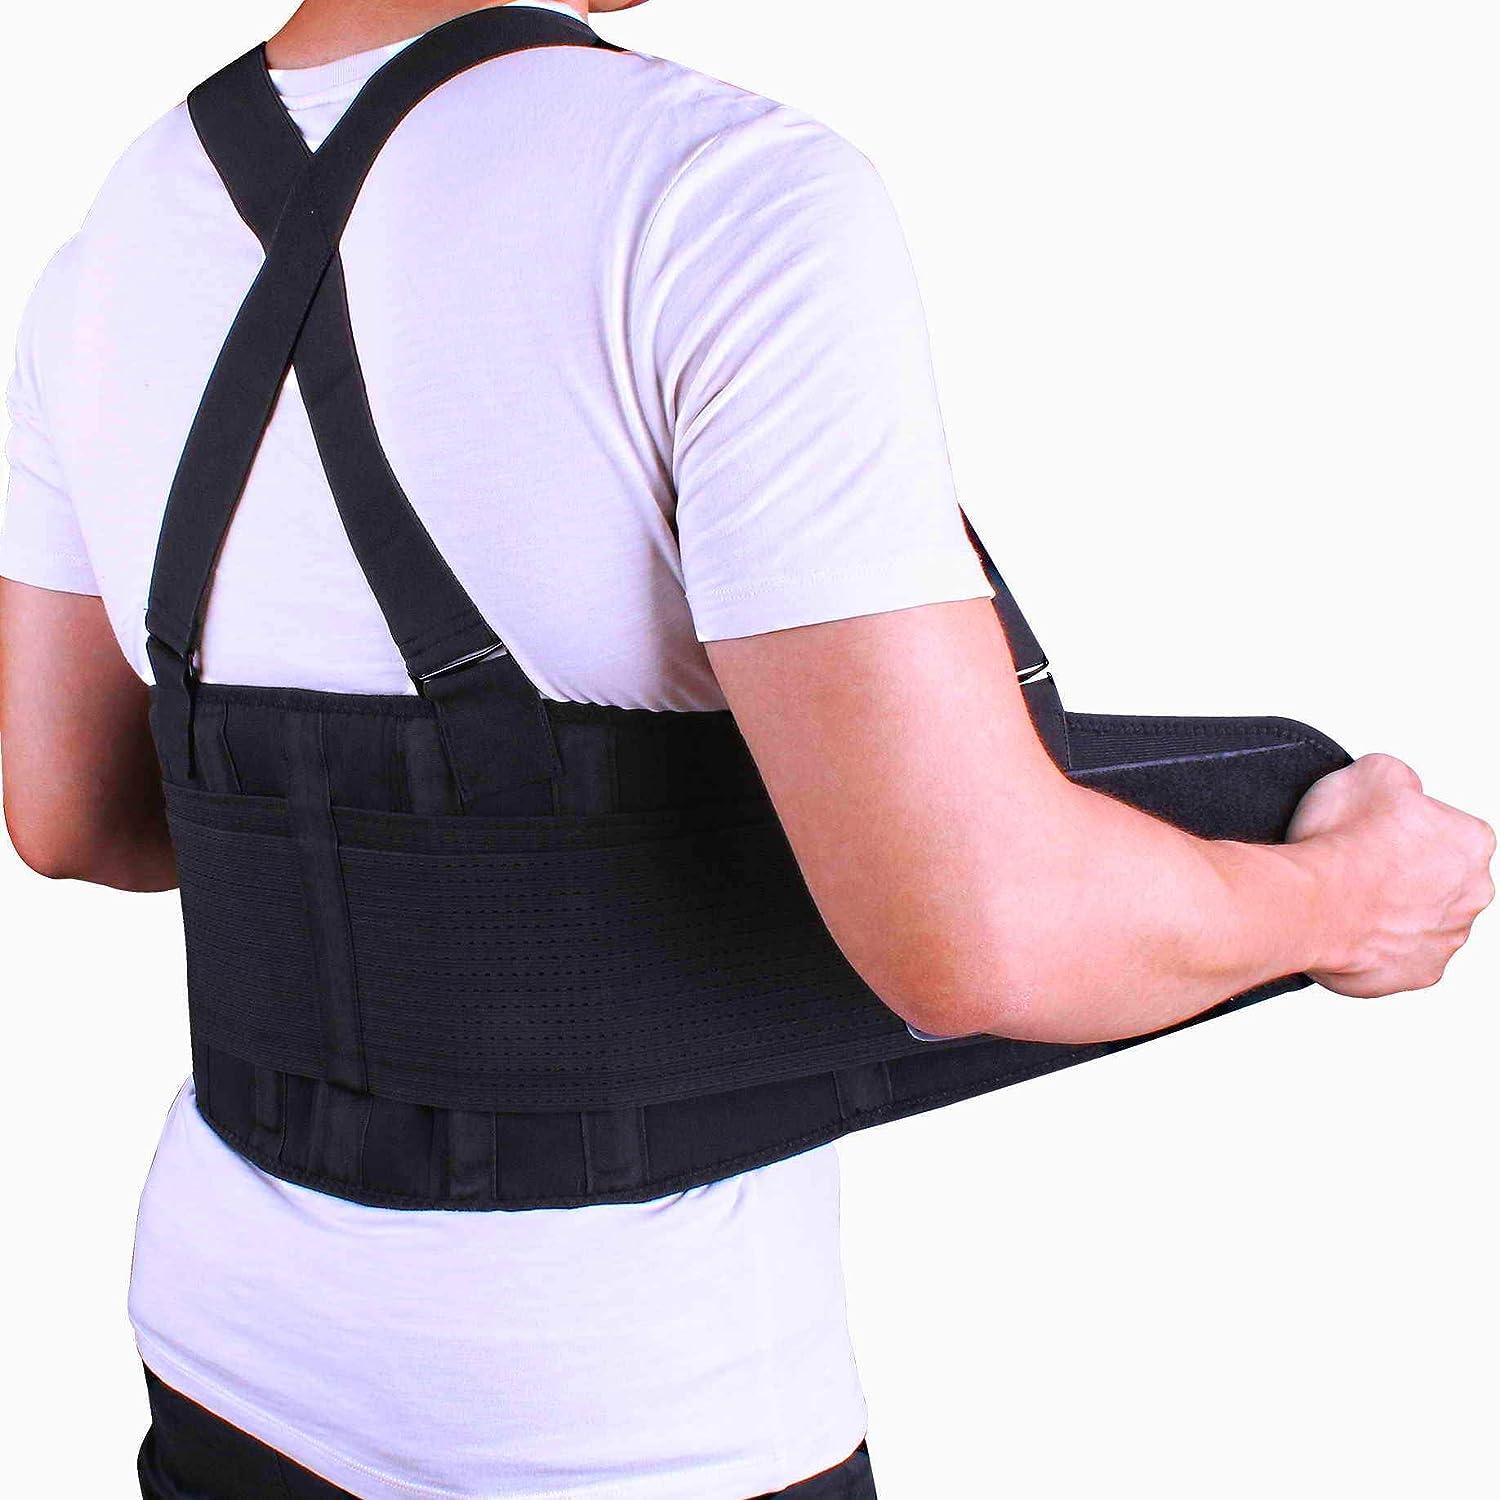 Lower Back Brace with Suspenders Lumbar Support Wrap for Posture Recovery Workout Herniated Disc Pain Relief Waist Trimmer Work AB Belt Industrial Adj